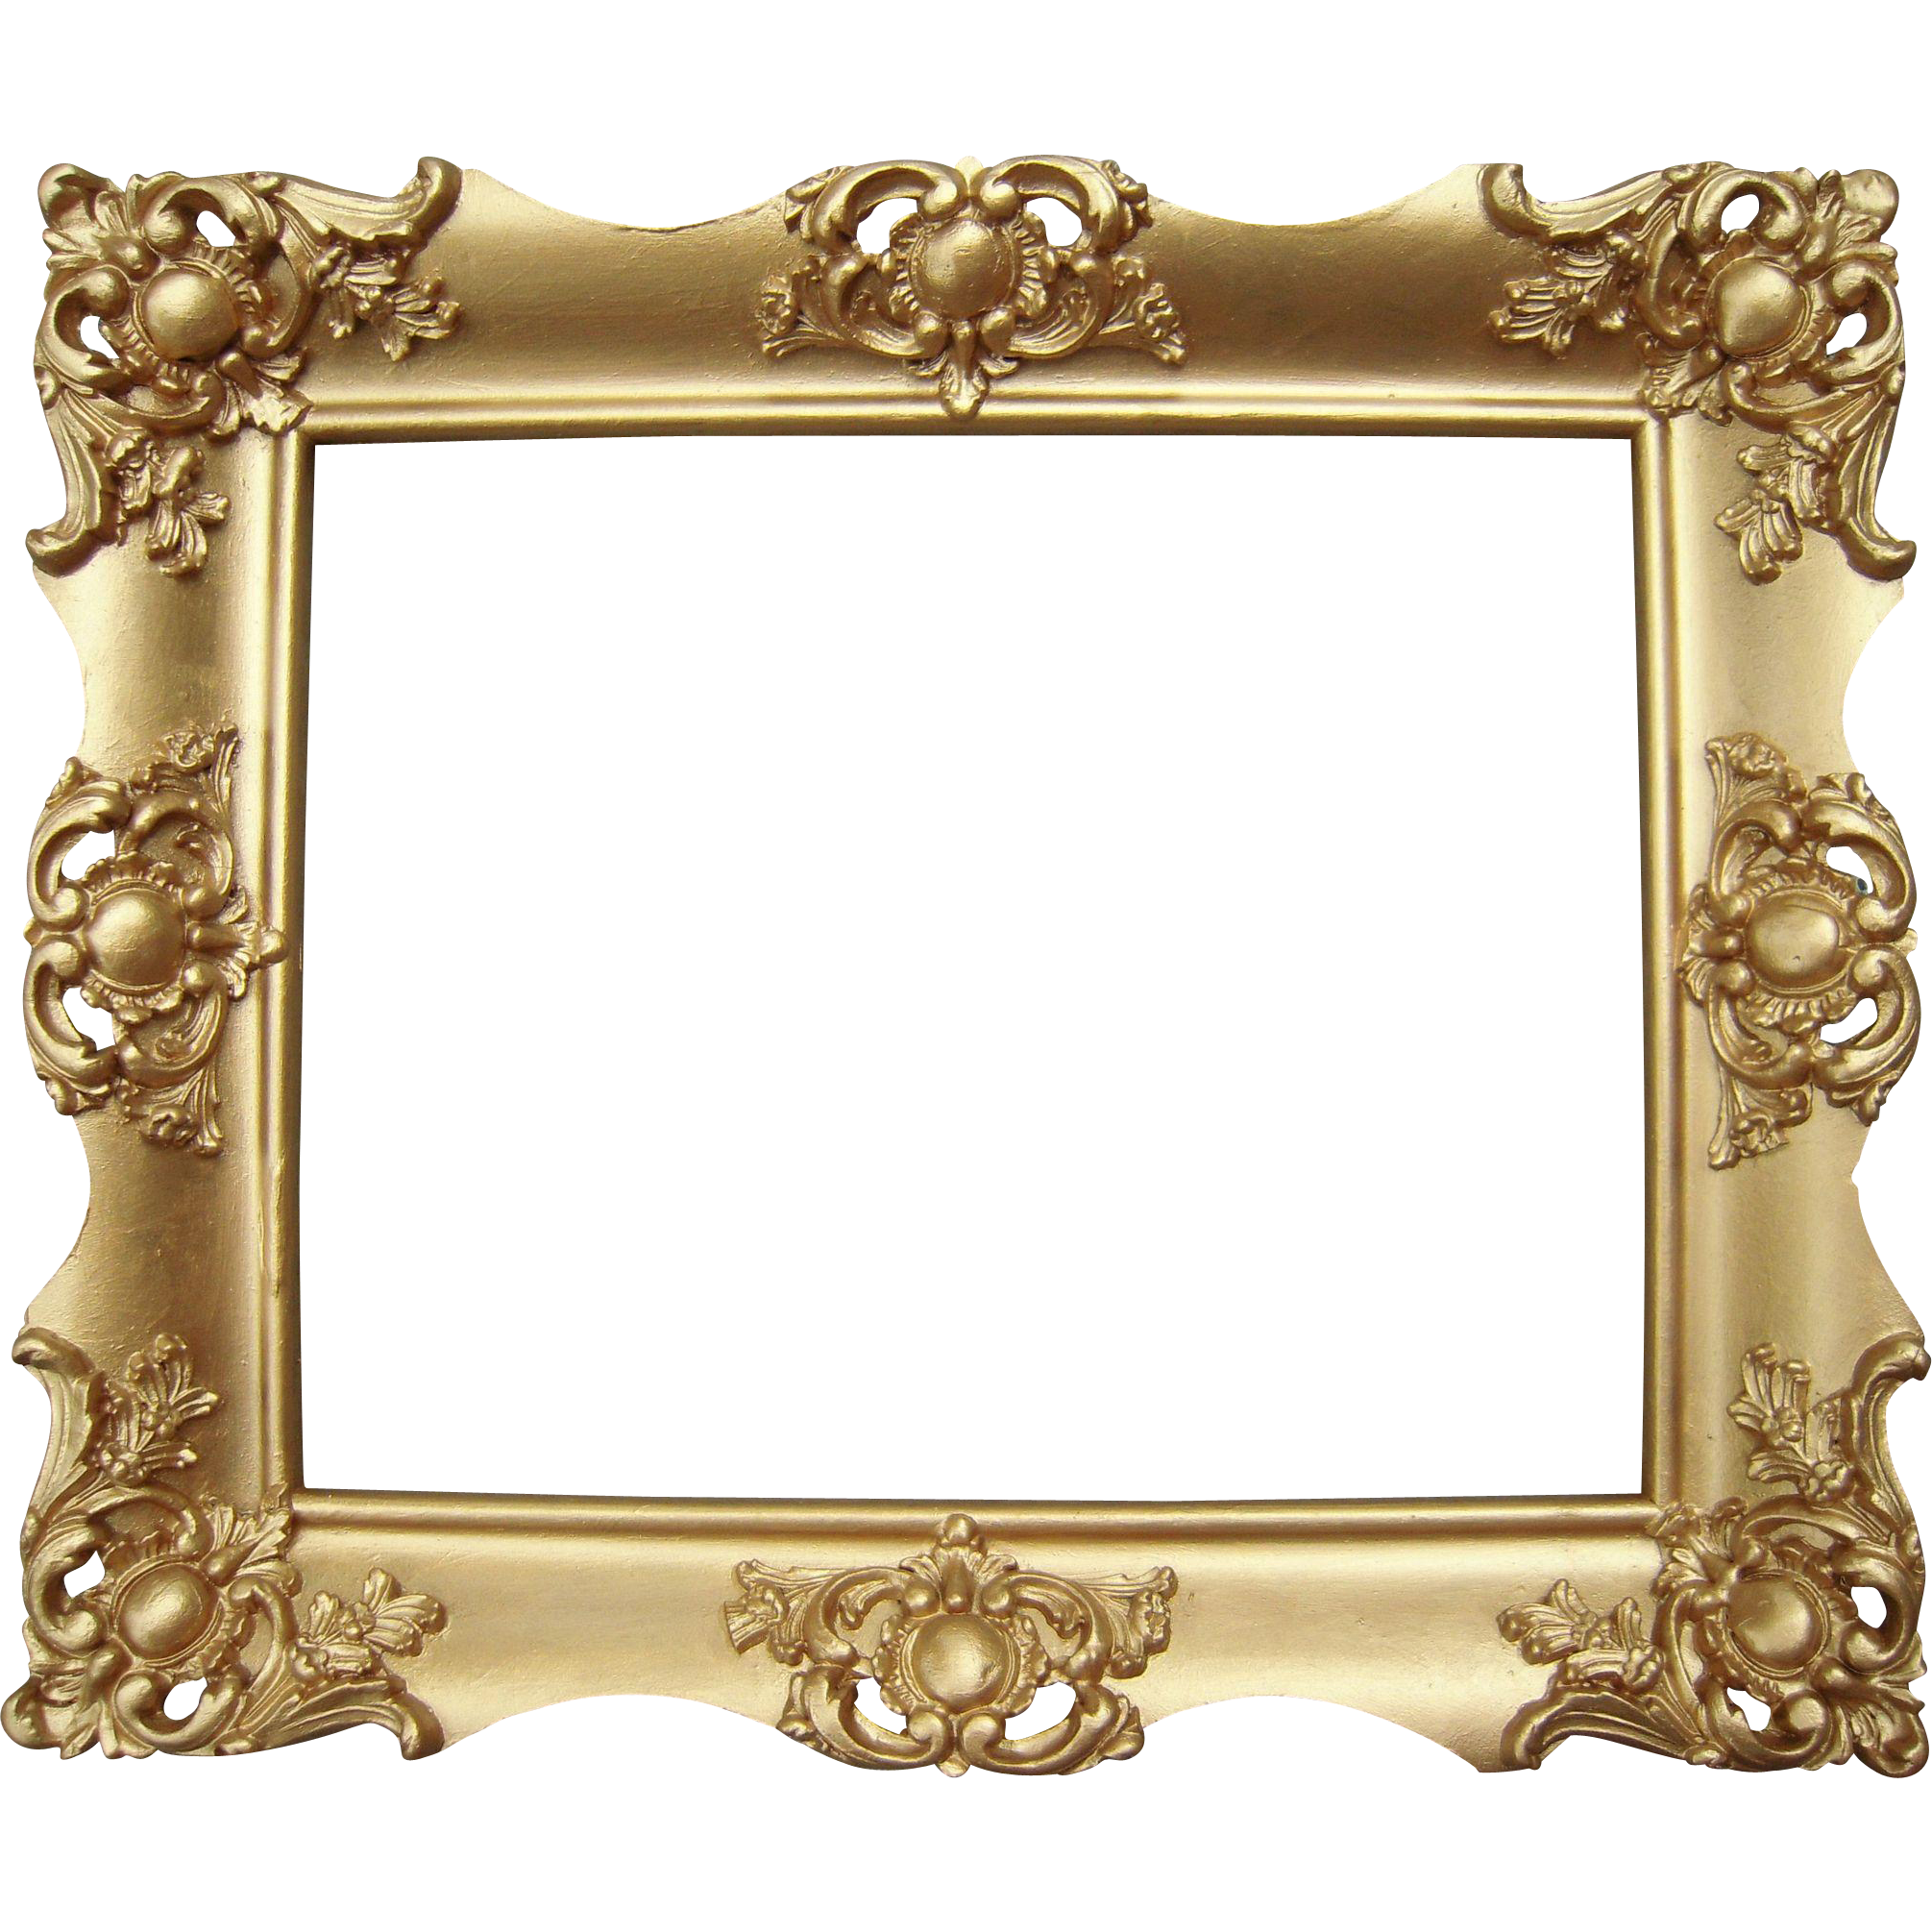 Ornate Gold Victorian Picture Frame 8 X 10 